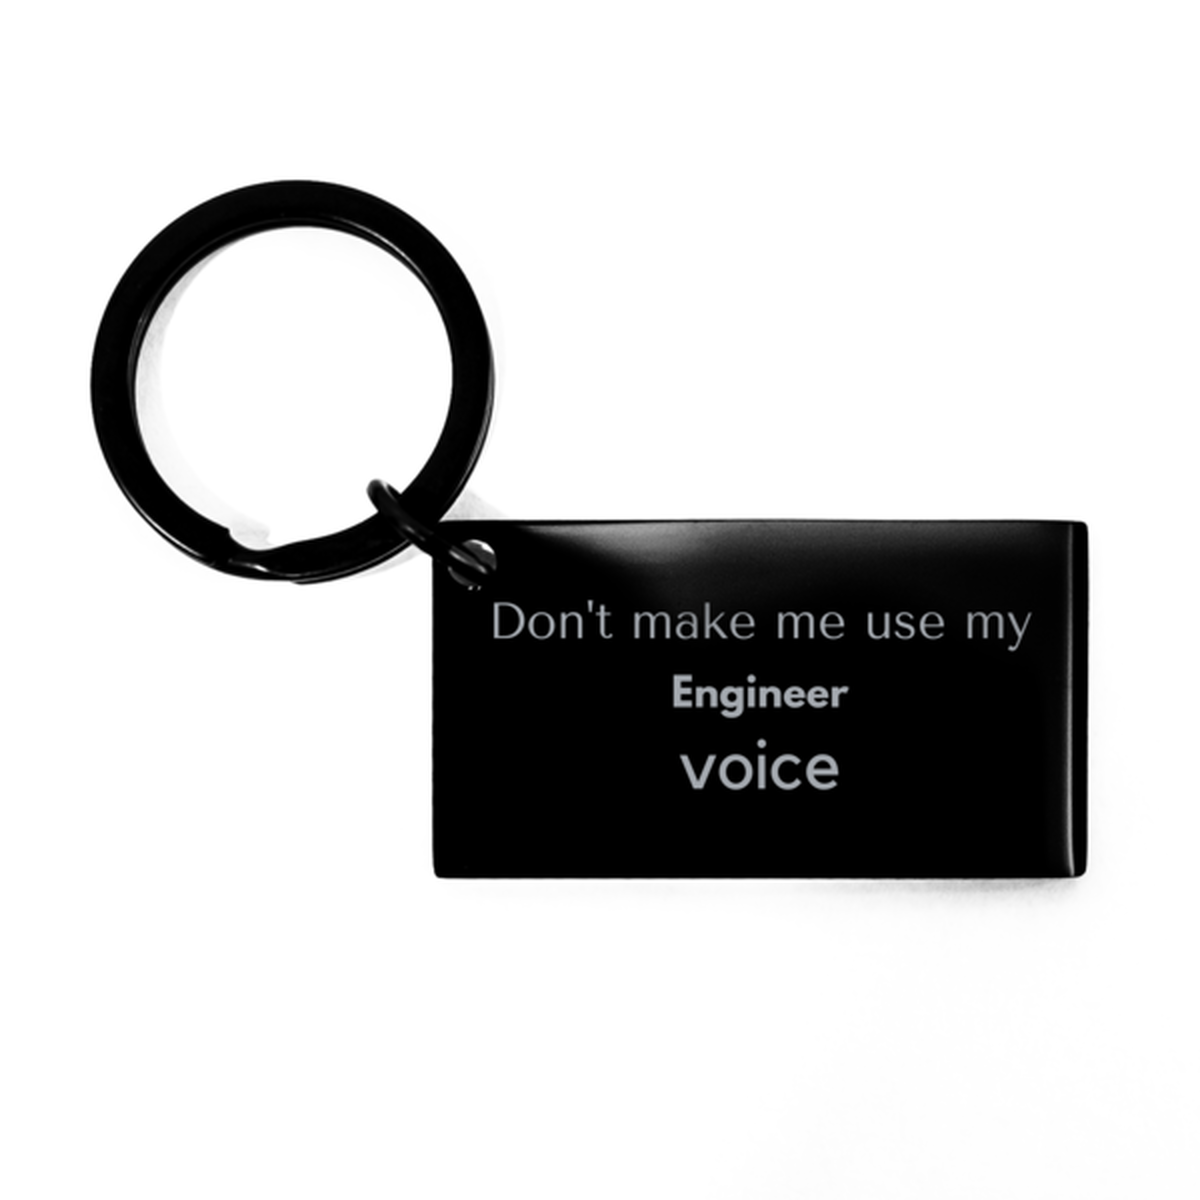 Don't make me use my Engineer voice, Sarcasm Engineer Gifts, Christmas Engineer Keychain Birthday Unique Gifts For Engineer Coworkers, Men, Women, Colleague, Friends